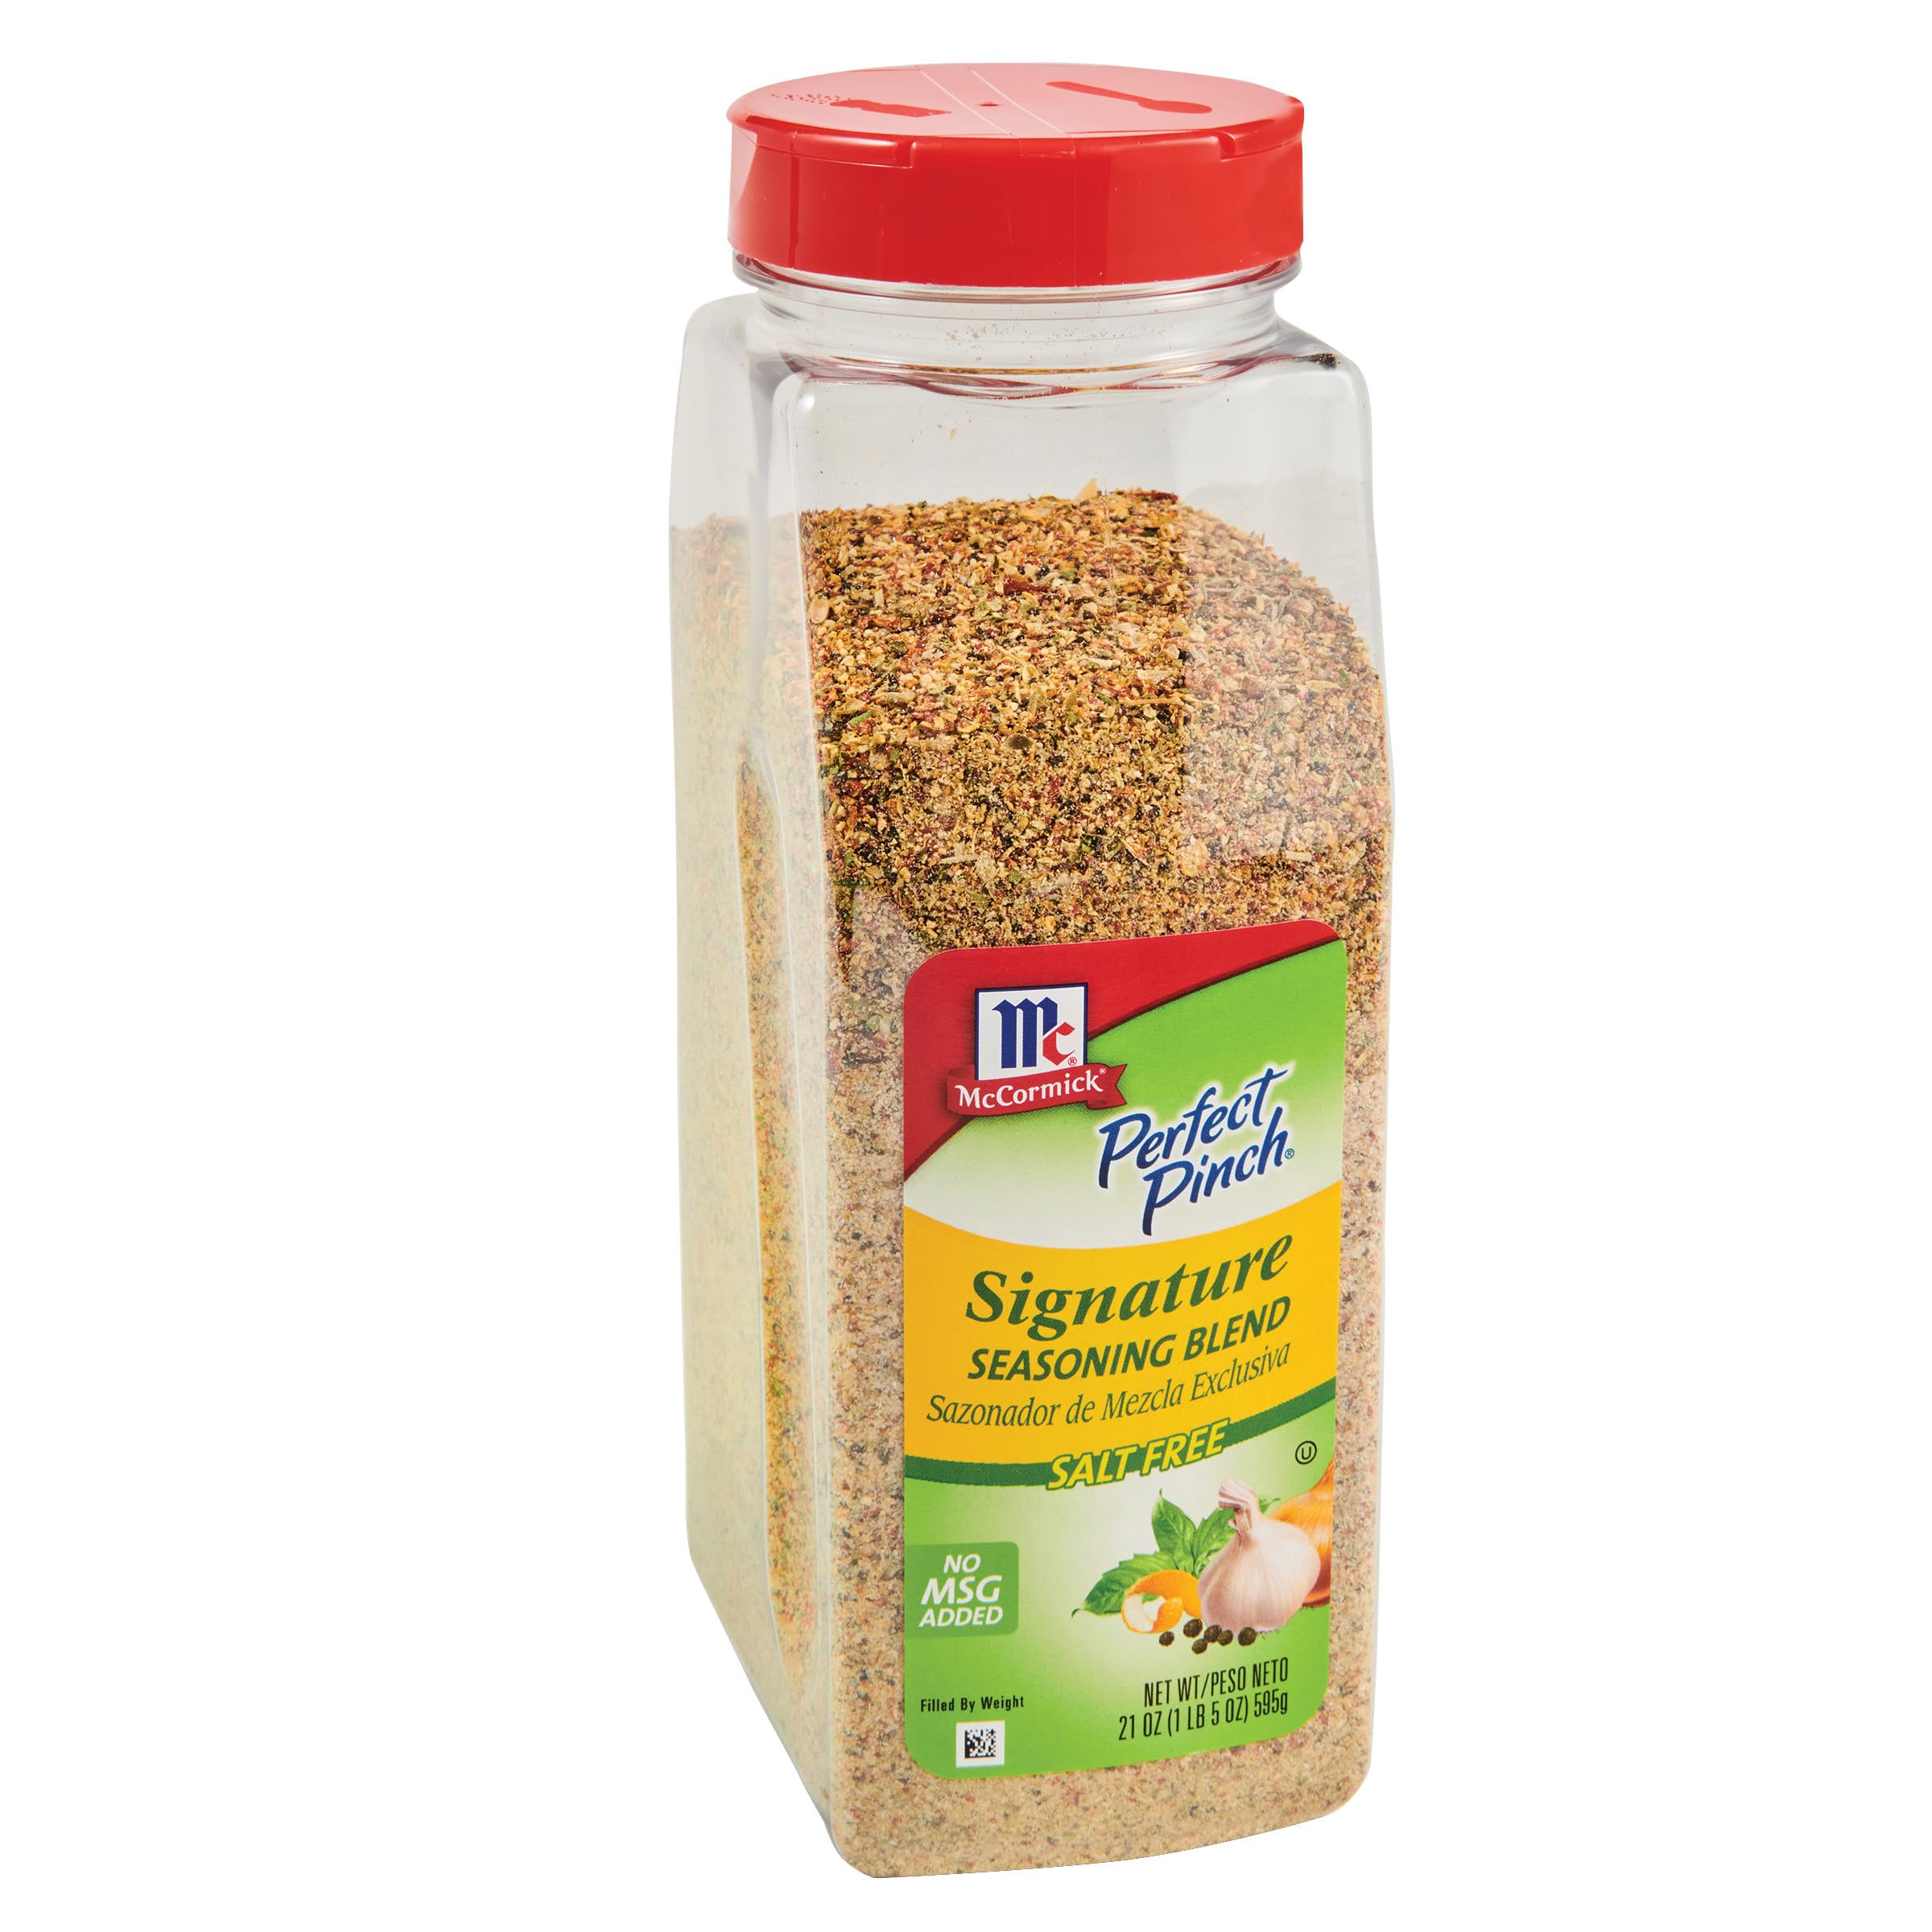 McCormick Perfect Pinch Signature Seasoning, 21 oz - One 21 Ounce Container of Signature Seasoning Blend Made With 14 Premium Herbs and Spices